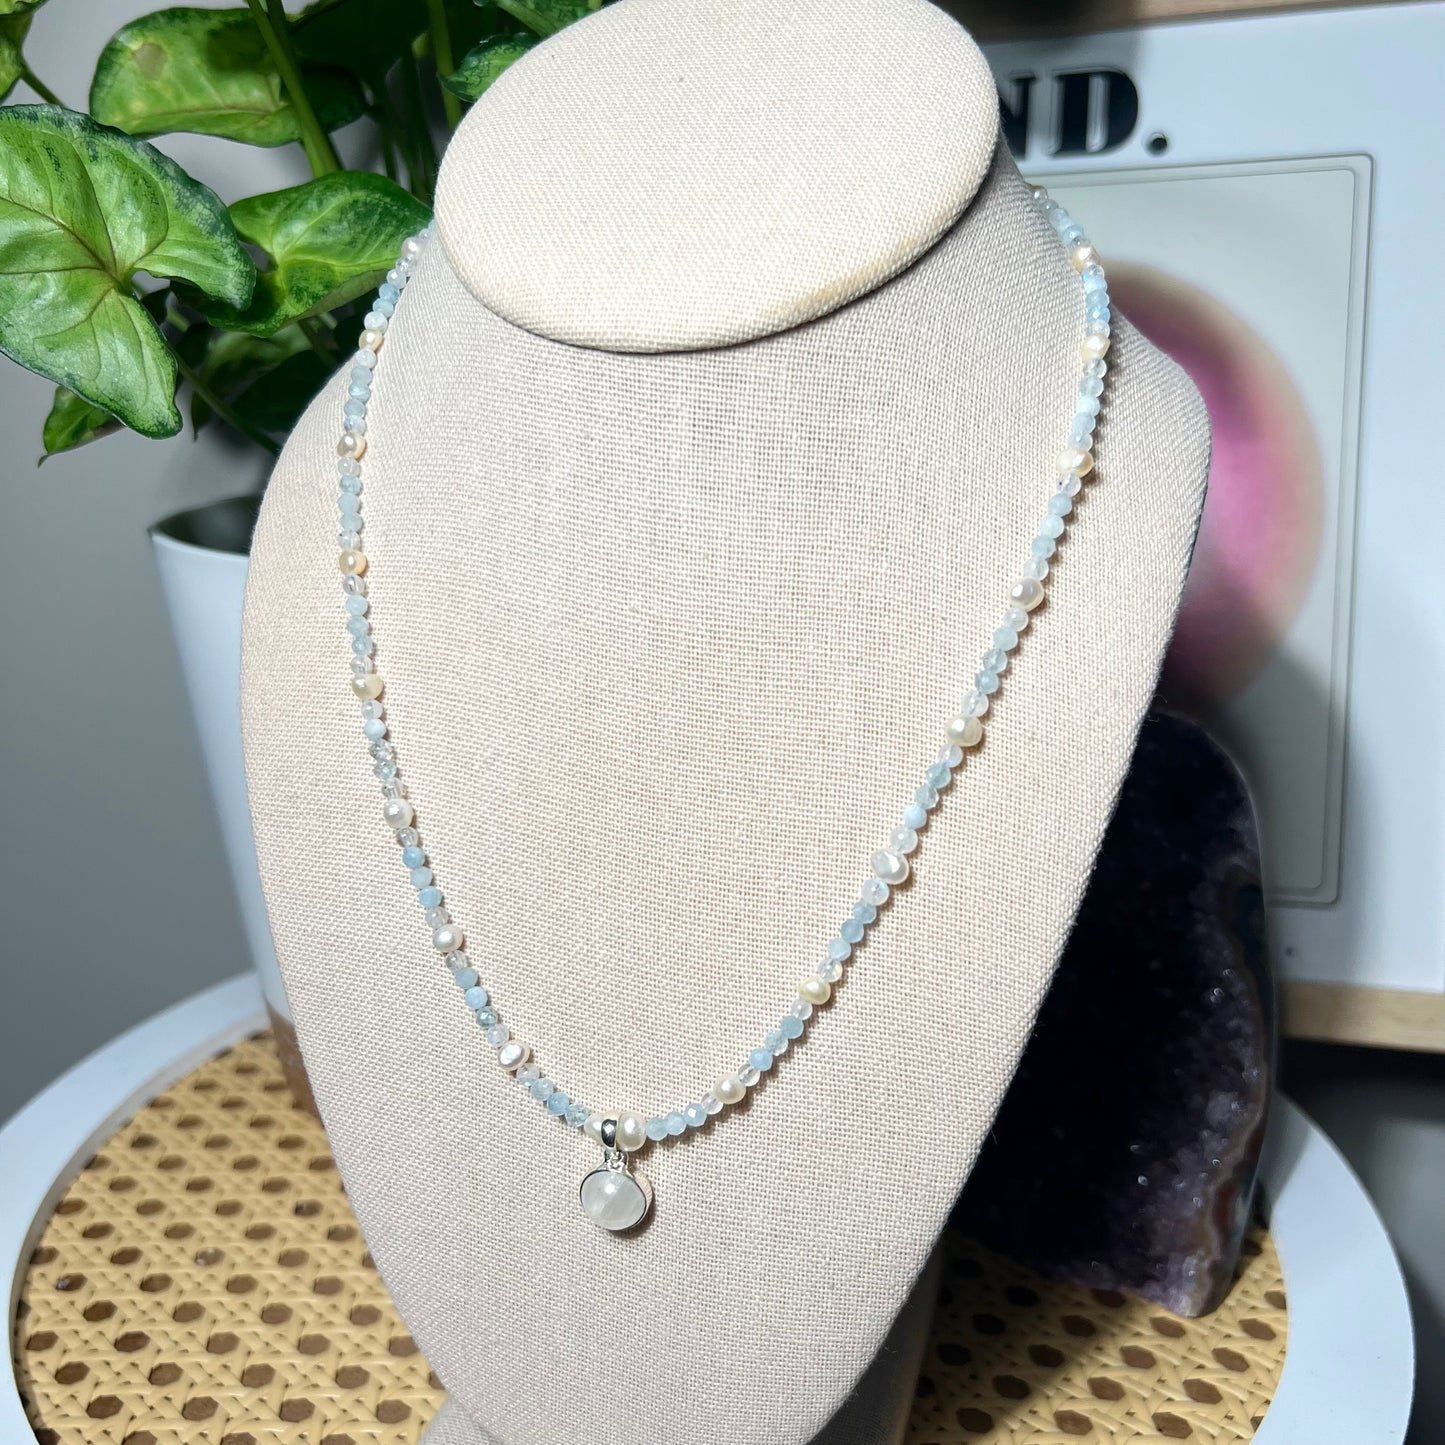 Serenity Pearl Necklace